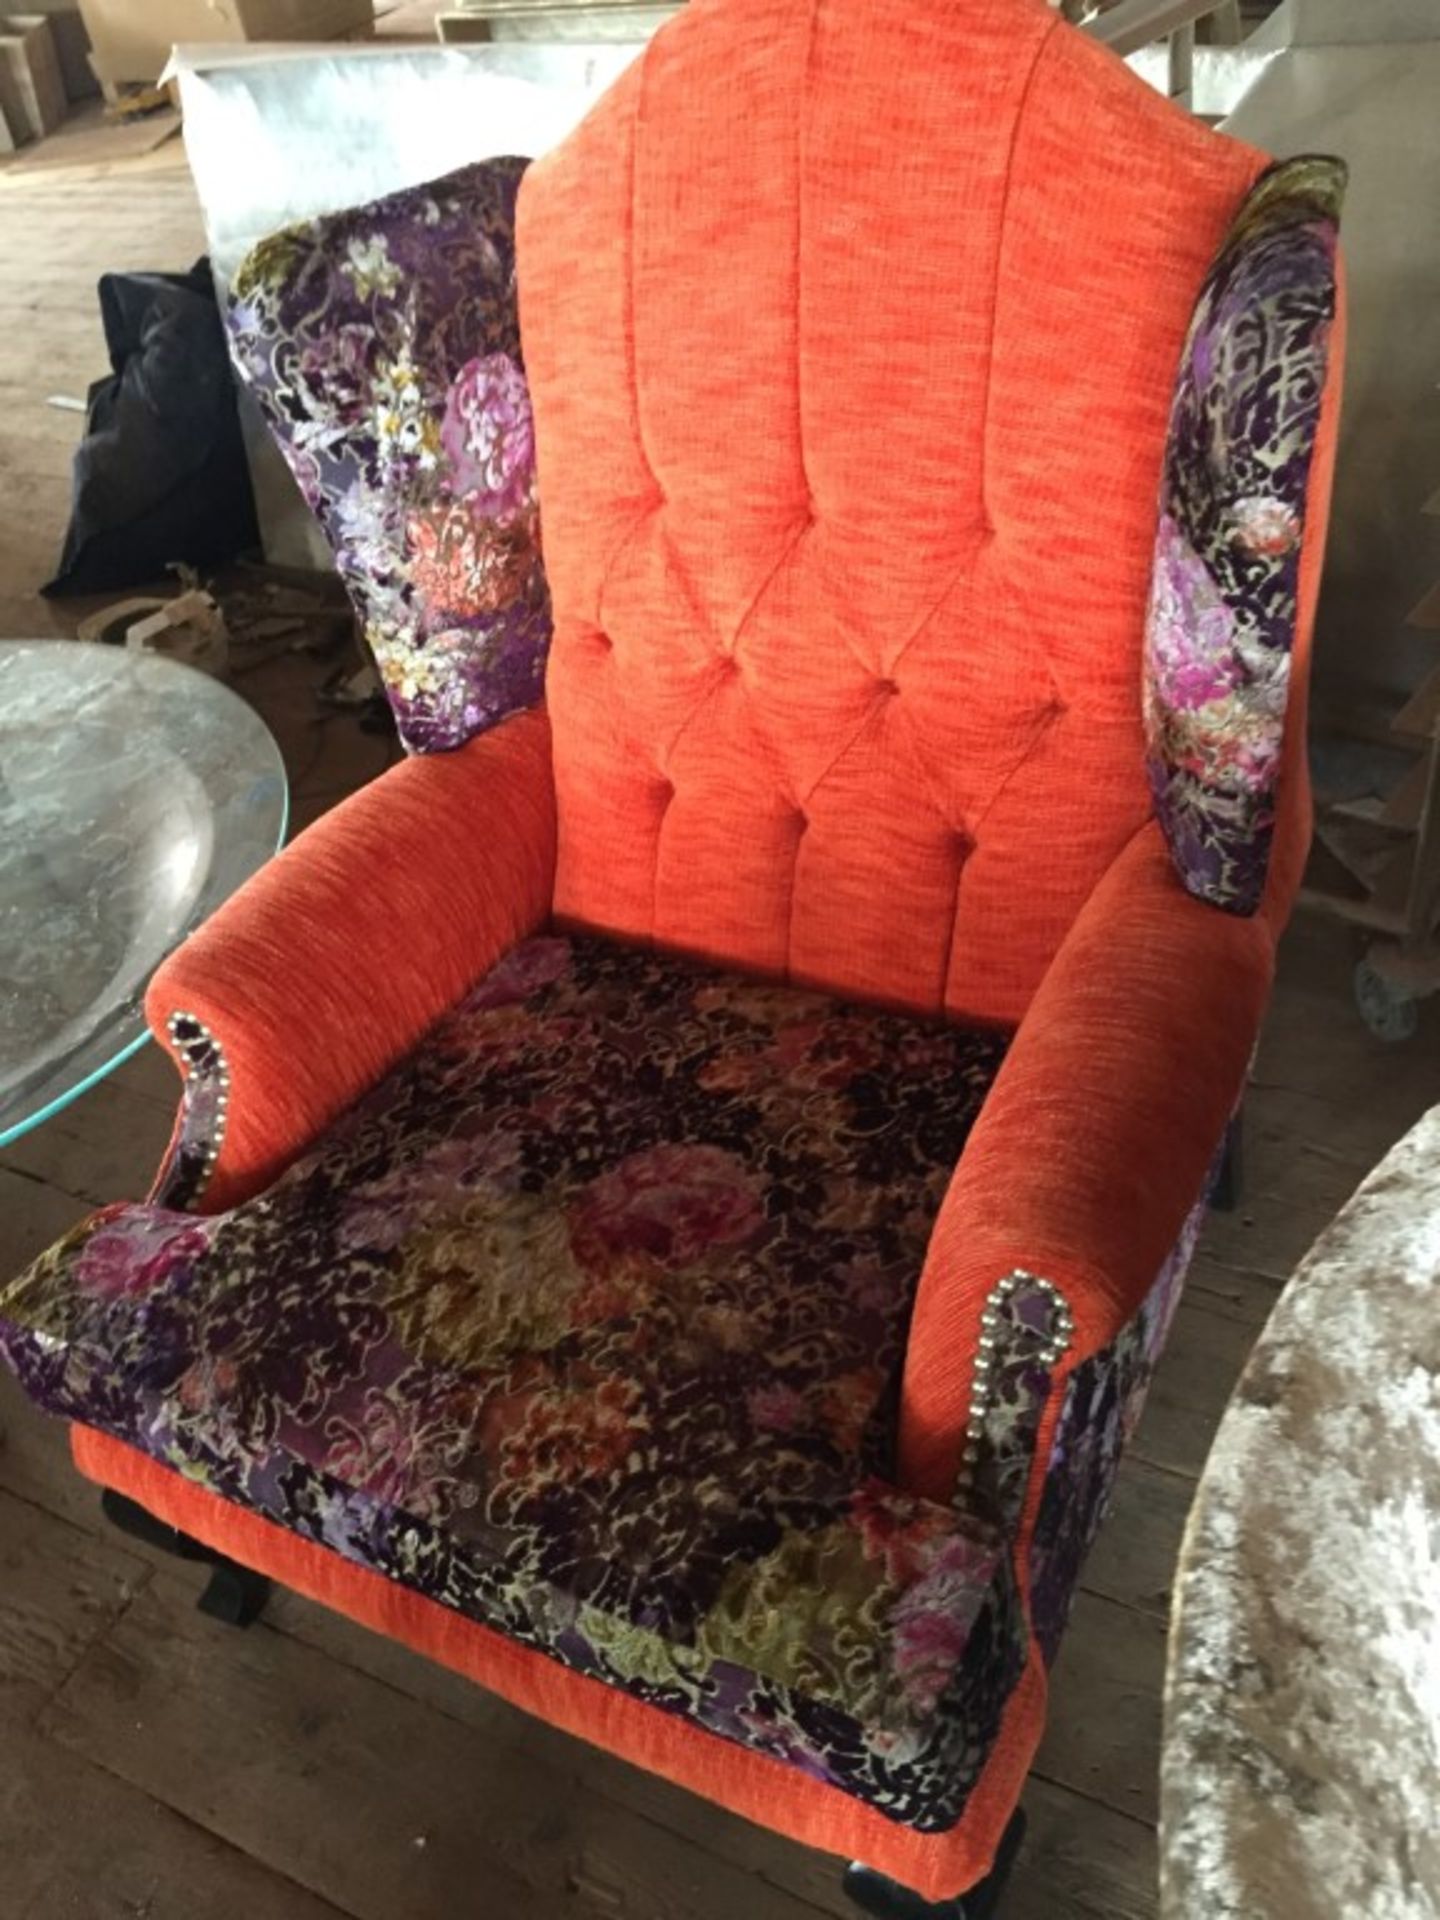 1 x Bespoke Handcrafted Wingback Chair In Upholstered In Luxury Orange & Floral Fabrics - - Image 3 of 7